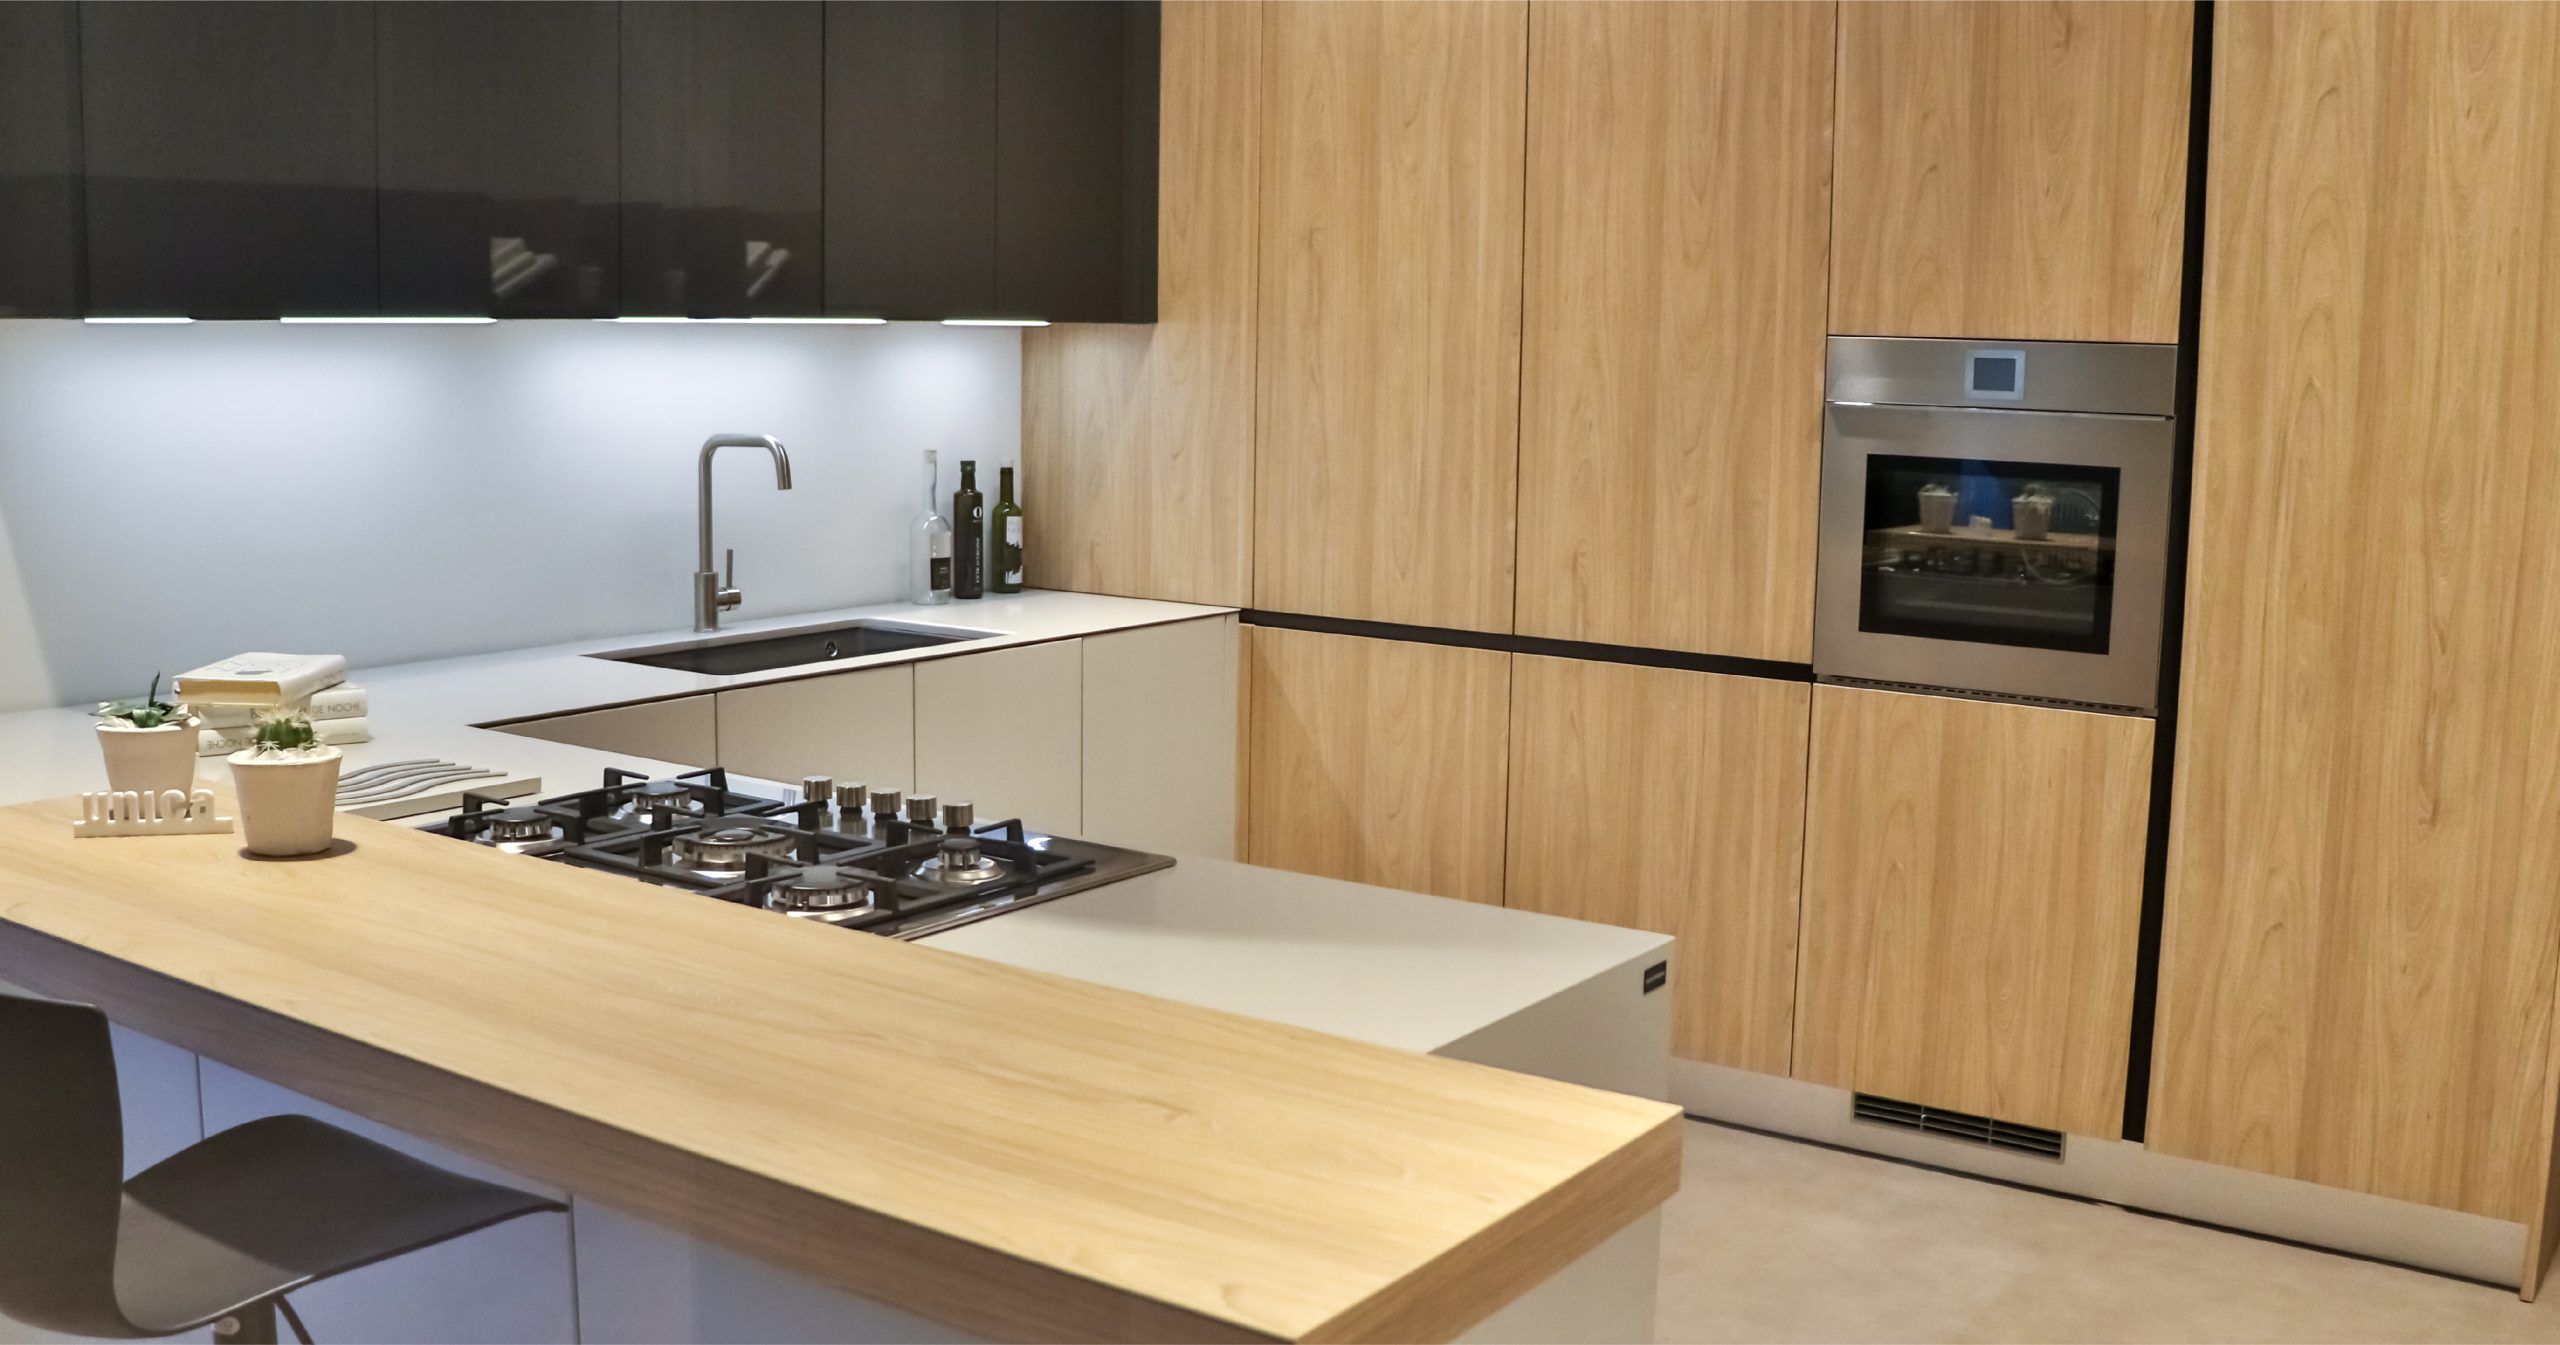 smart technology into the kitchen designs